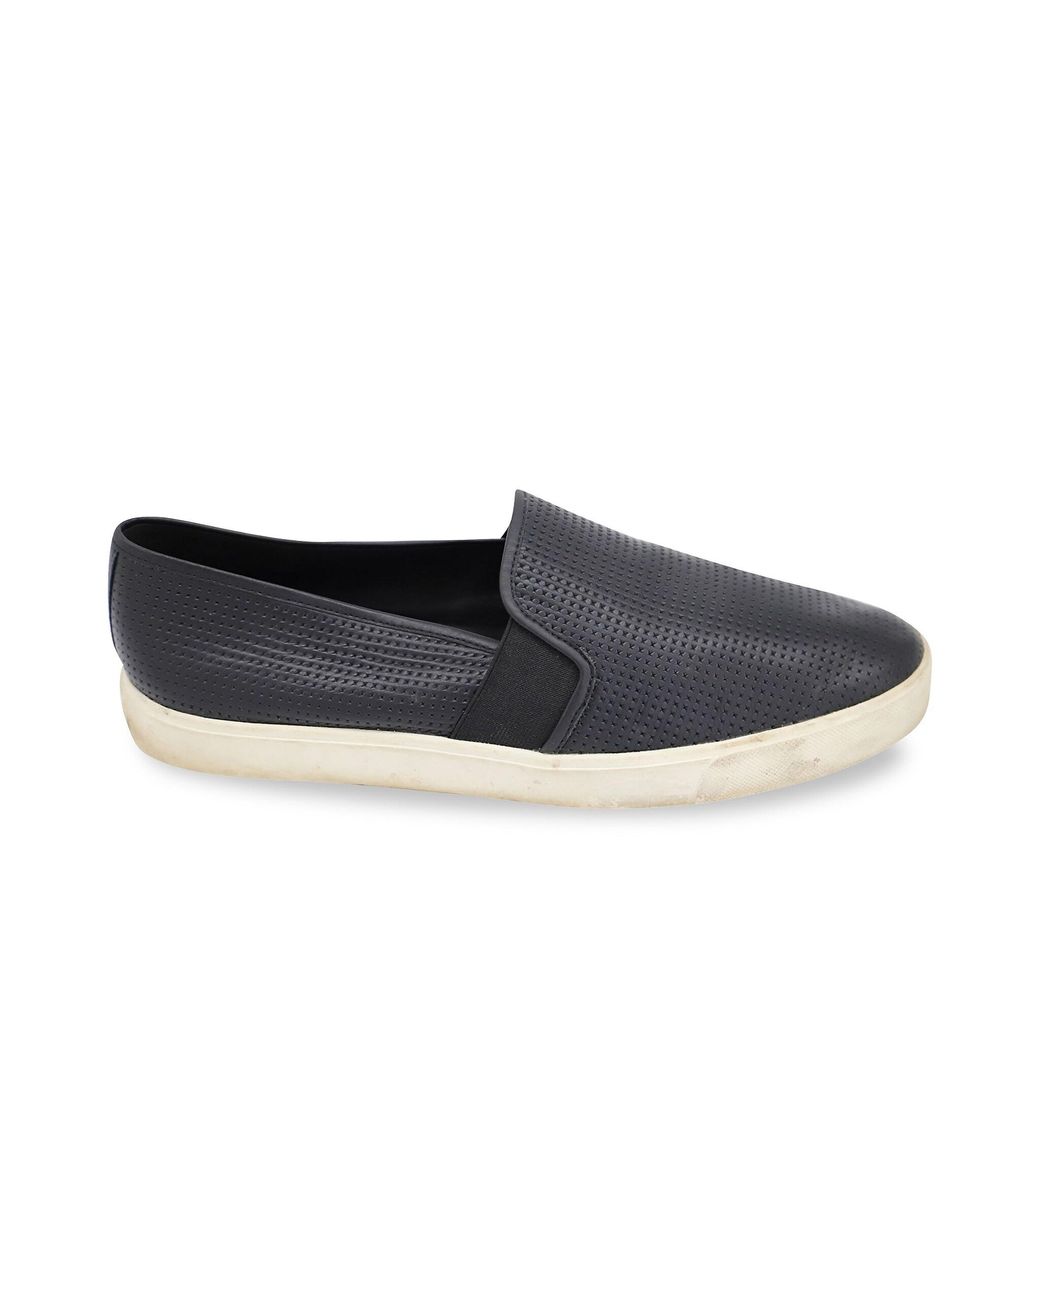 Vince Blair Perforated Slip-on Sneakers In Black Calfskin Leather ...